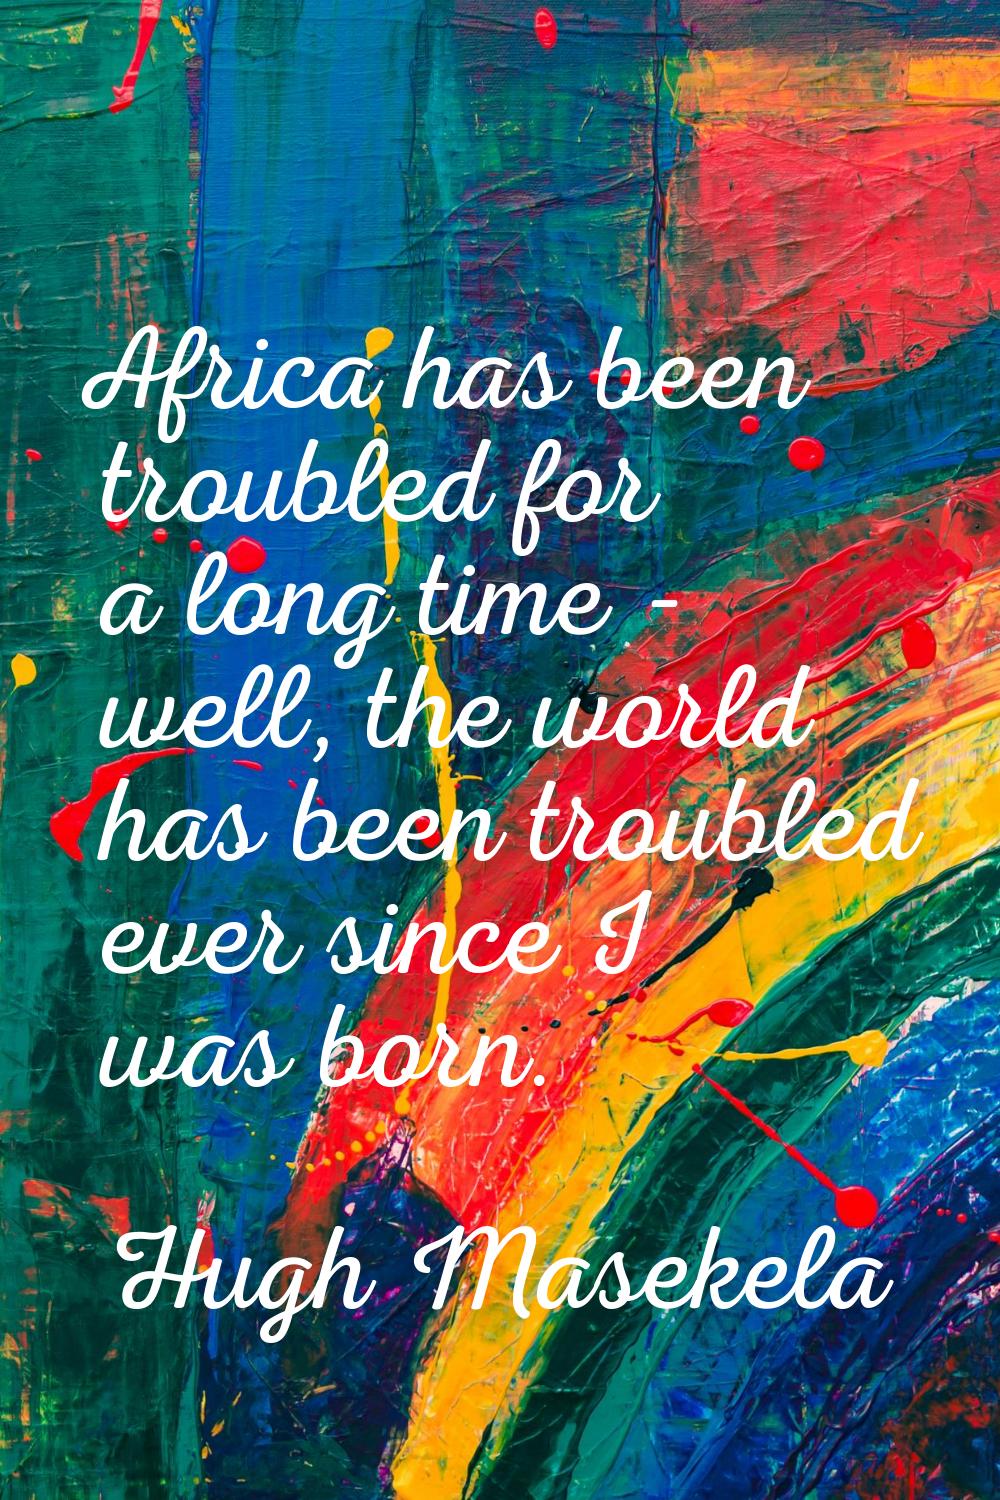 Africa has been troubled for a long time - well, the world has been troubled ever since I was born.